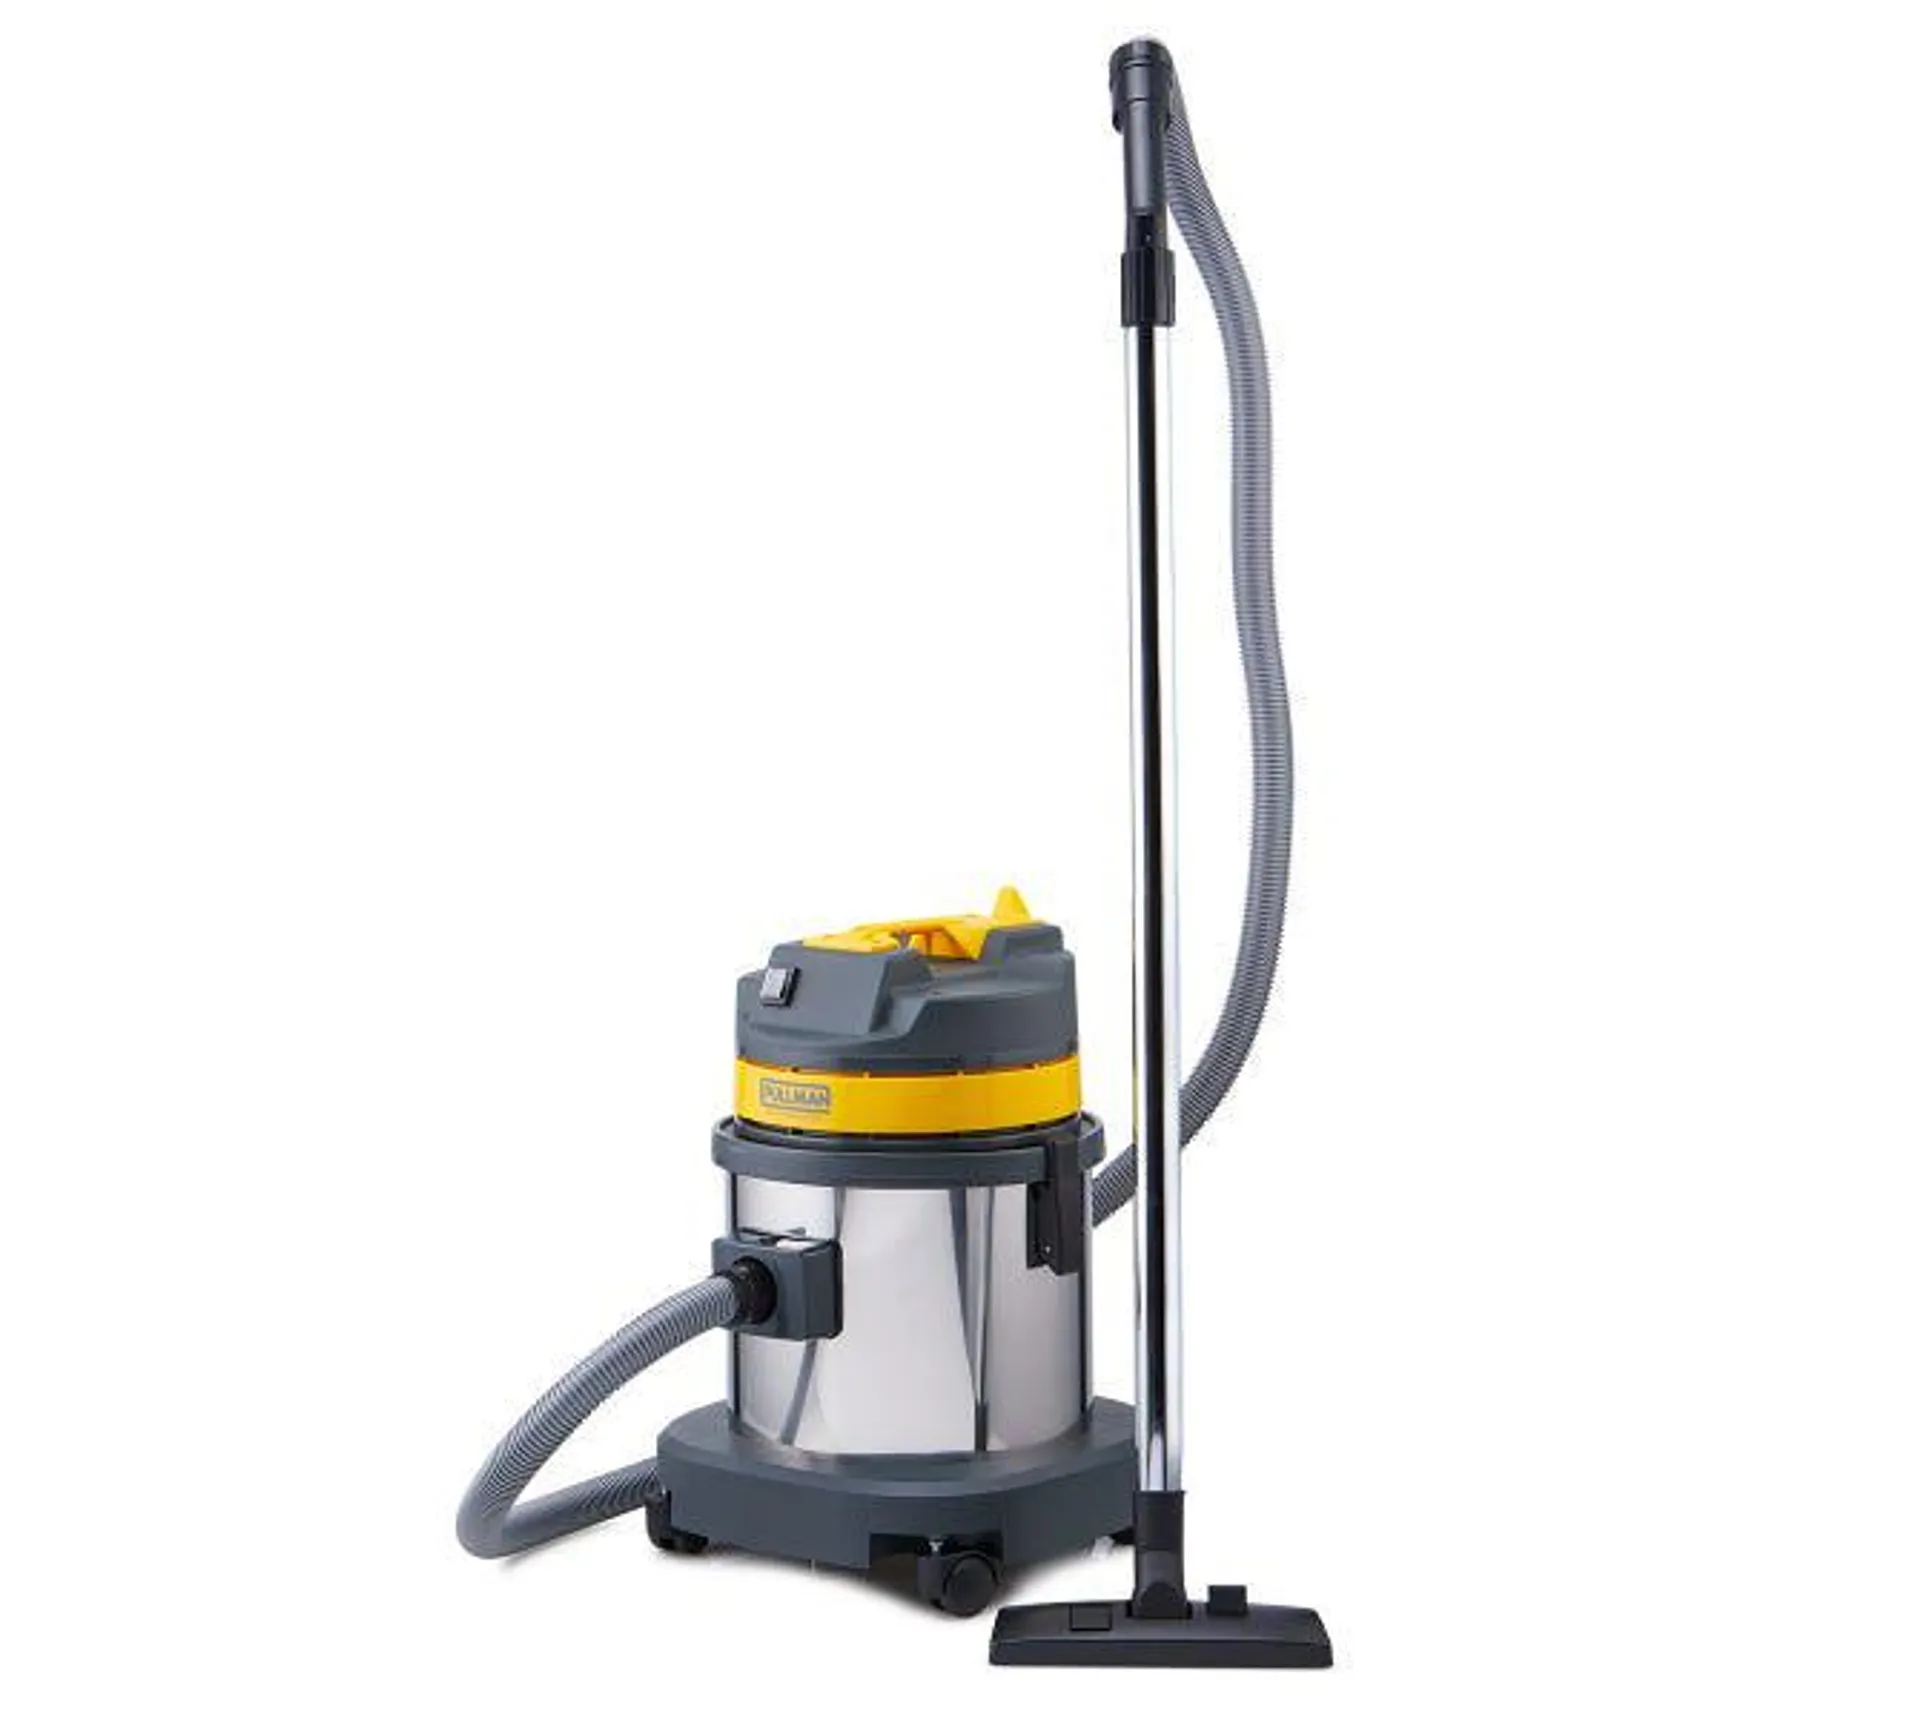 Pullman CB15 Wet & Dry Commercial Vacuum Cleaner